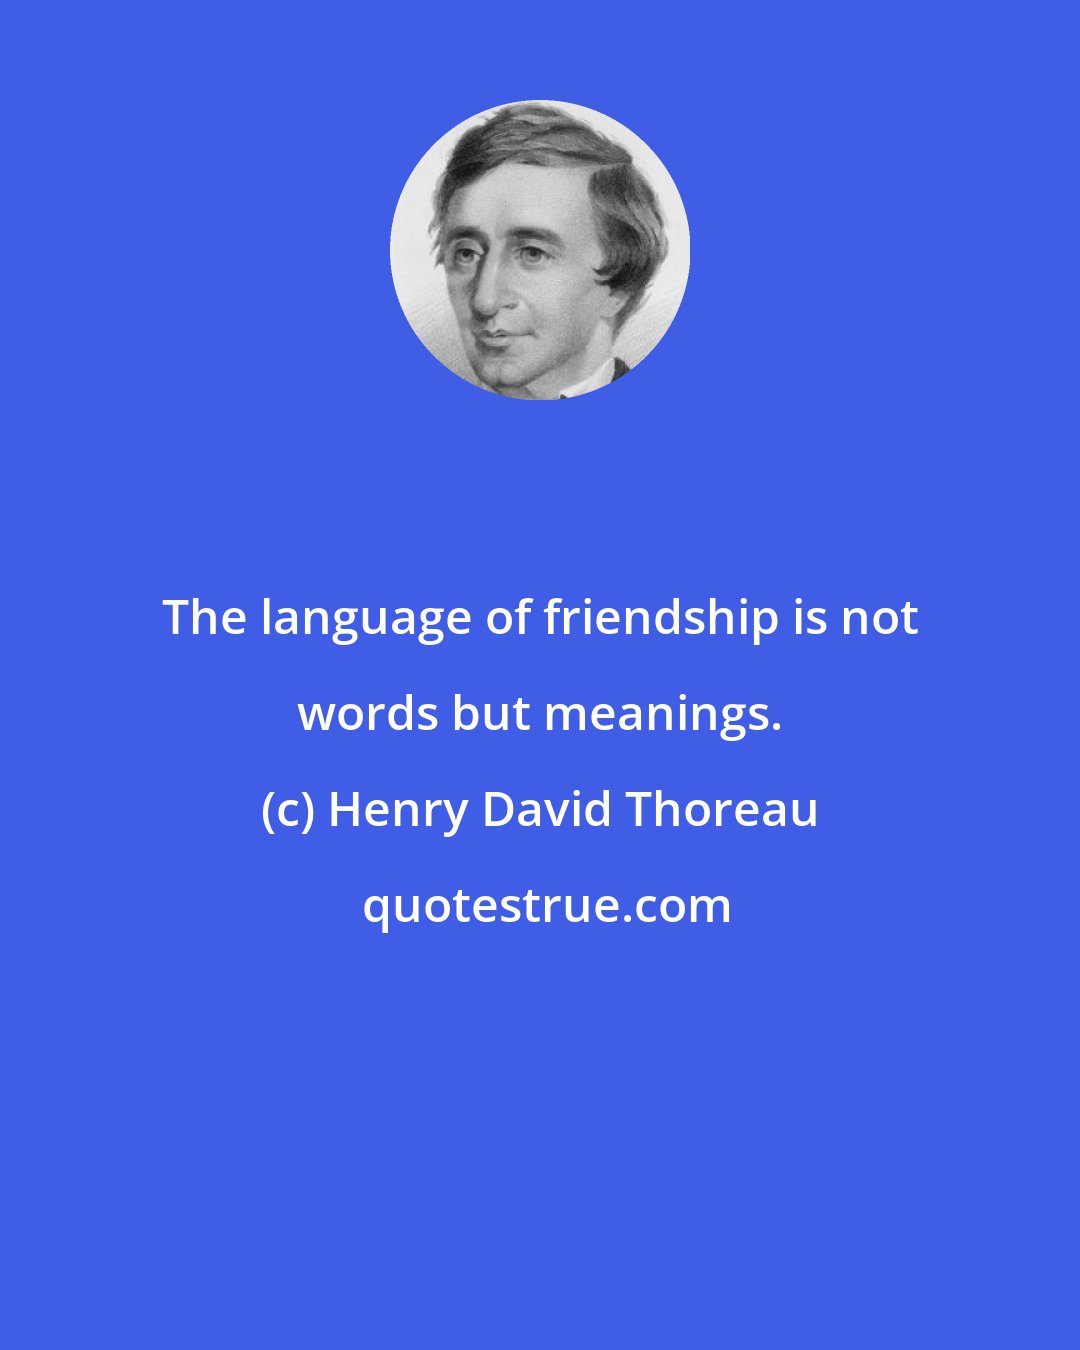 Henry David Thoreau: The language of friendship is not words but meanings.